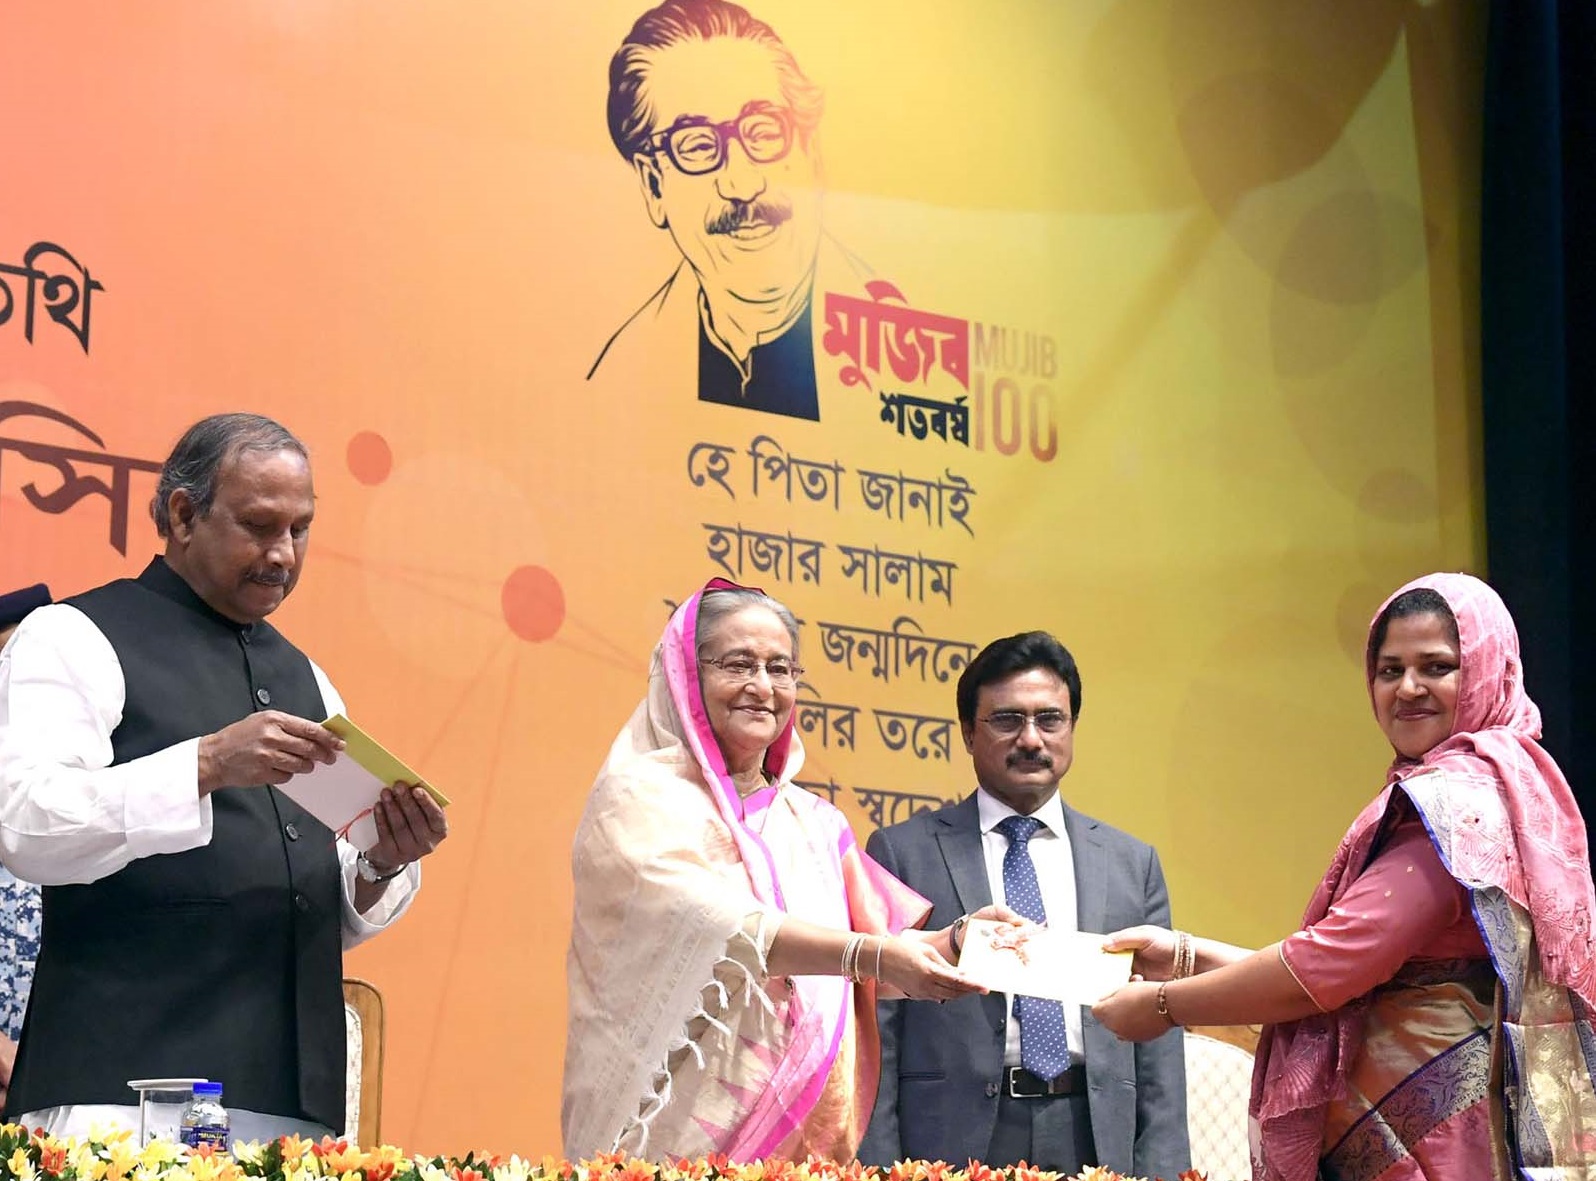 Use resources best via research: PM Hasina 